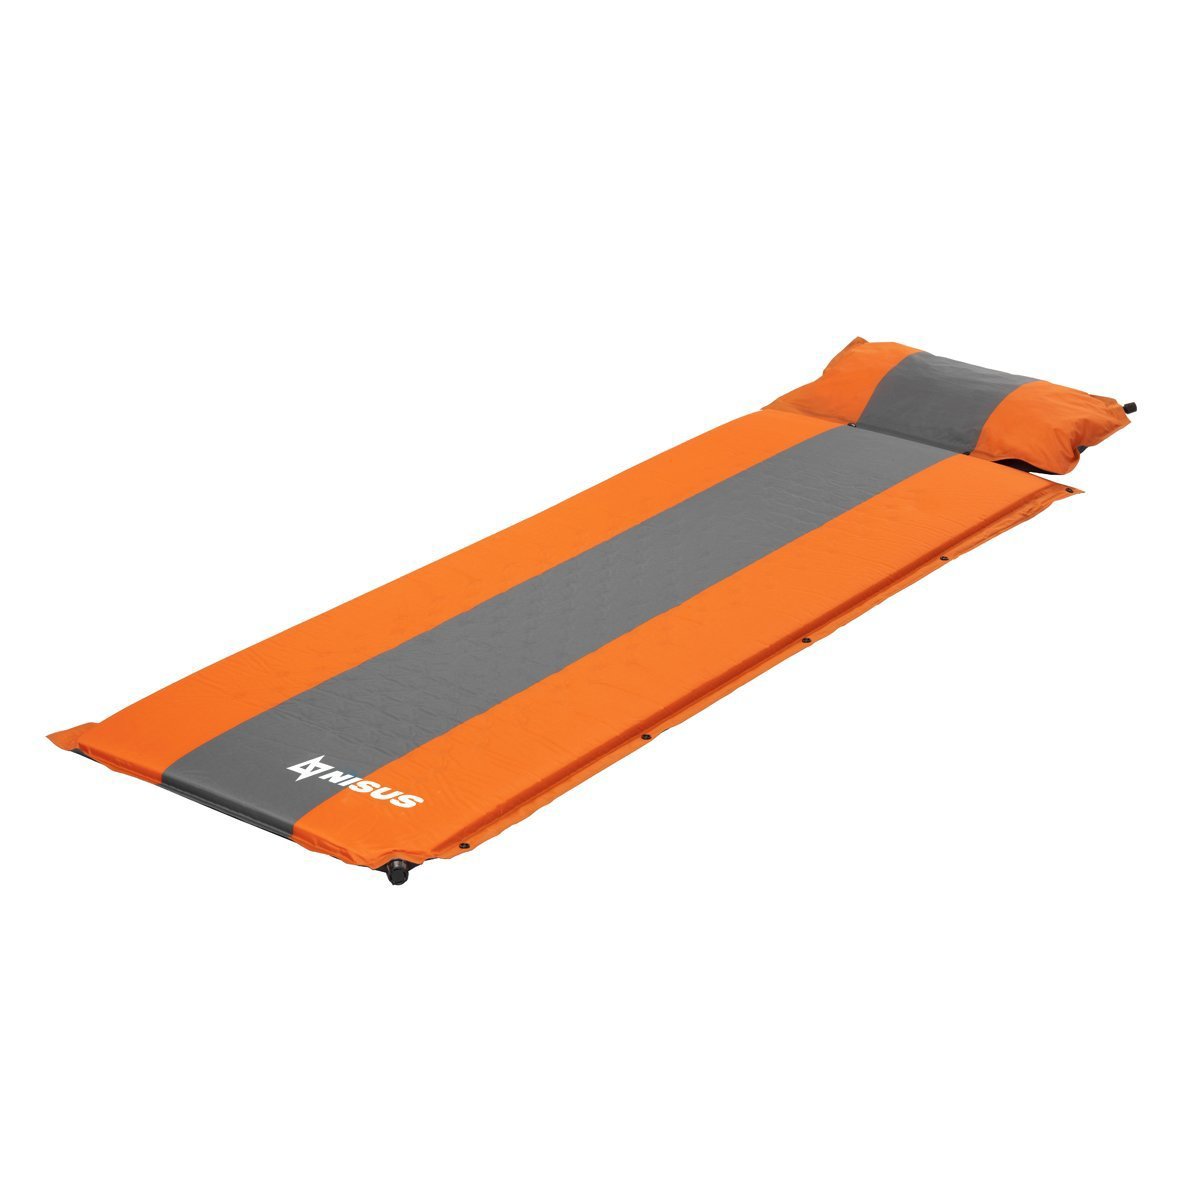 1.5-inch Lightweight Self Inflating Sleeping Pad with Pillow, Orange